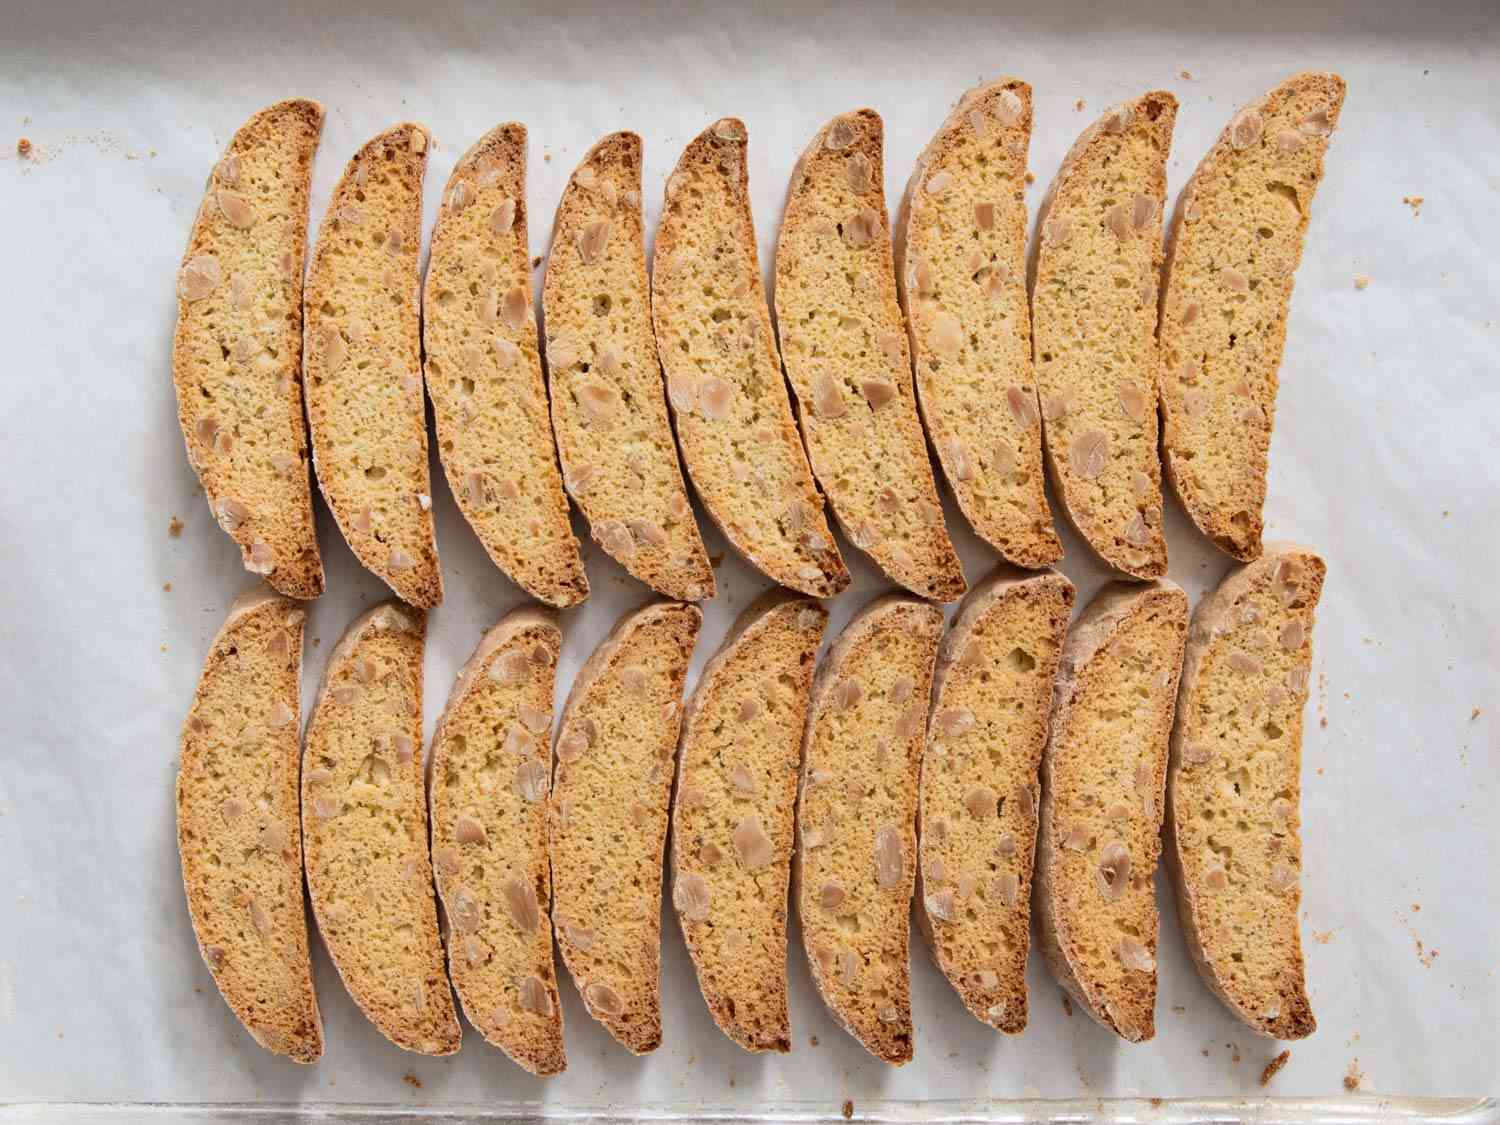 Slices of fully browned biscotti on a baking sheet.